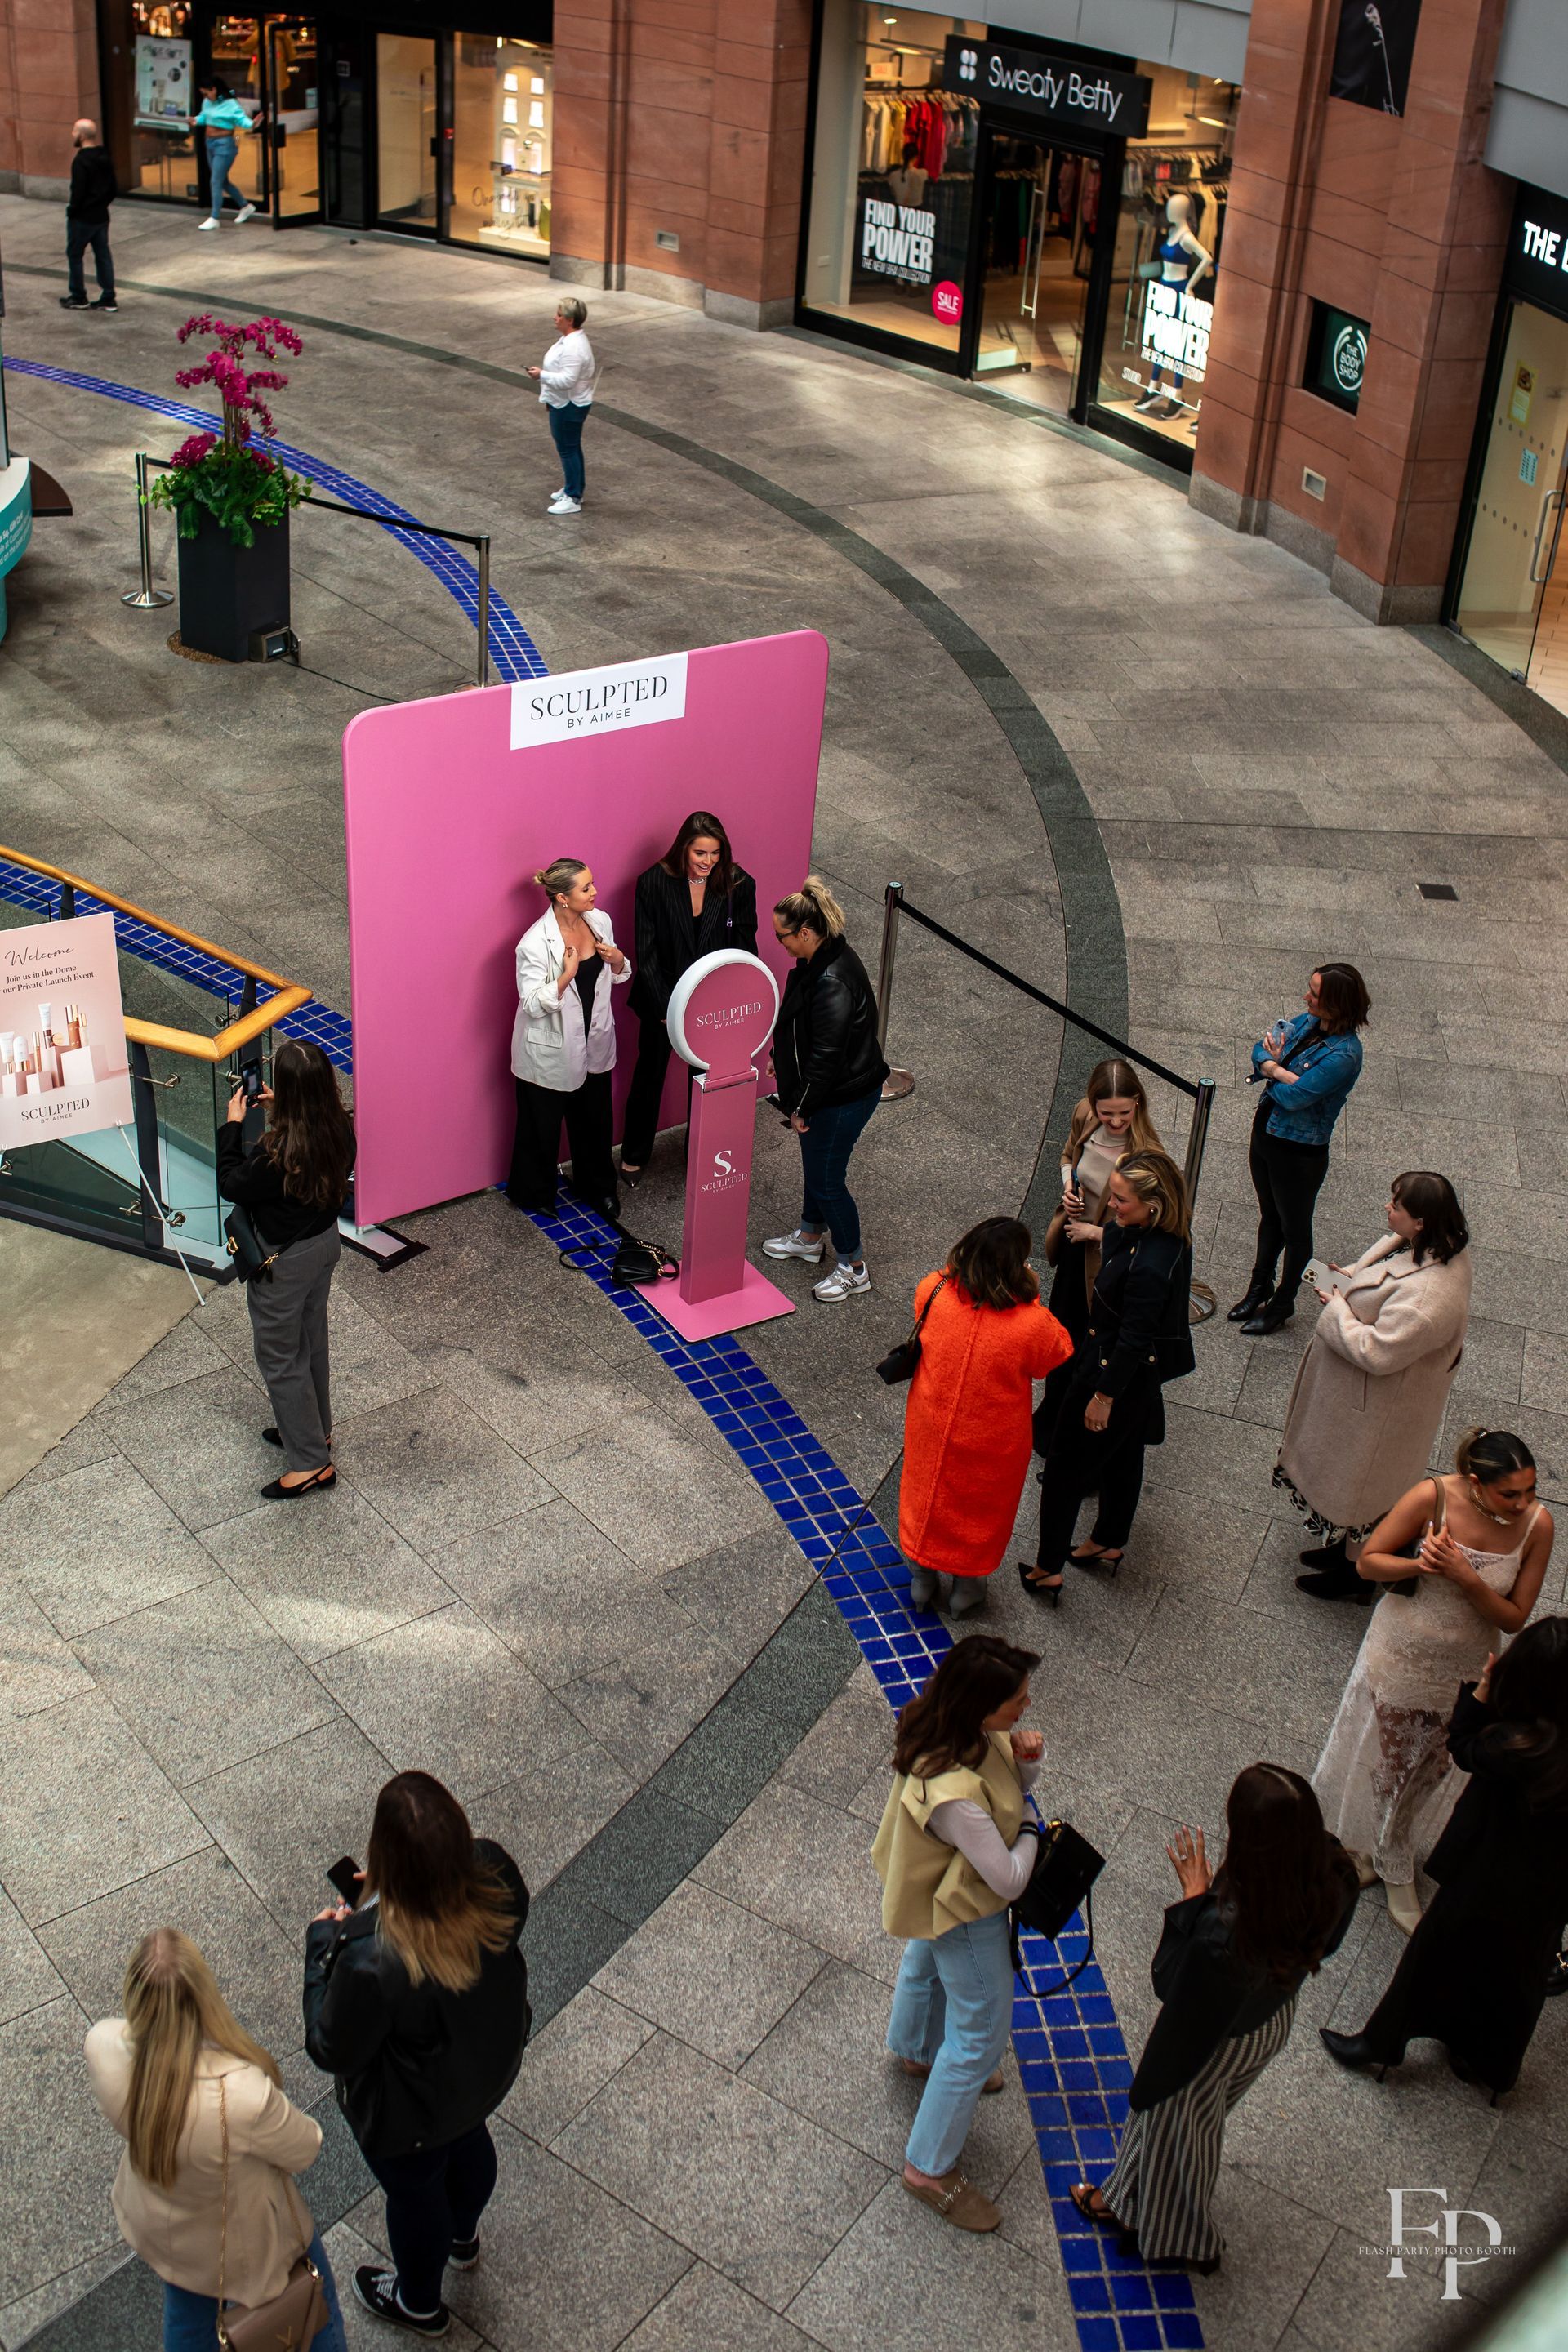 Guests capture their best moments with the Selfie Photo Booth of Flash Party at the corporate activation in Frisco.